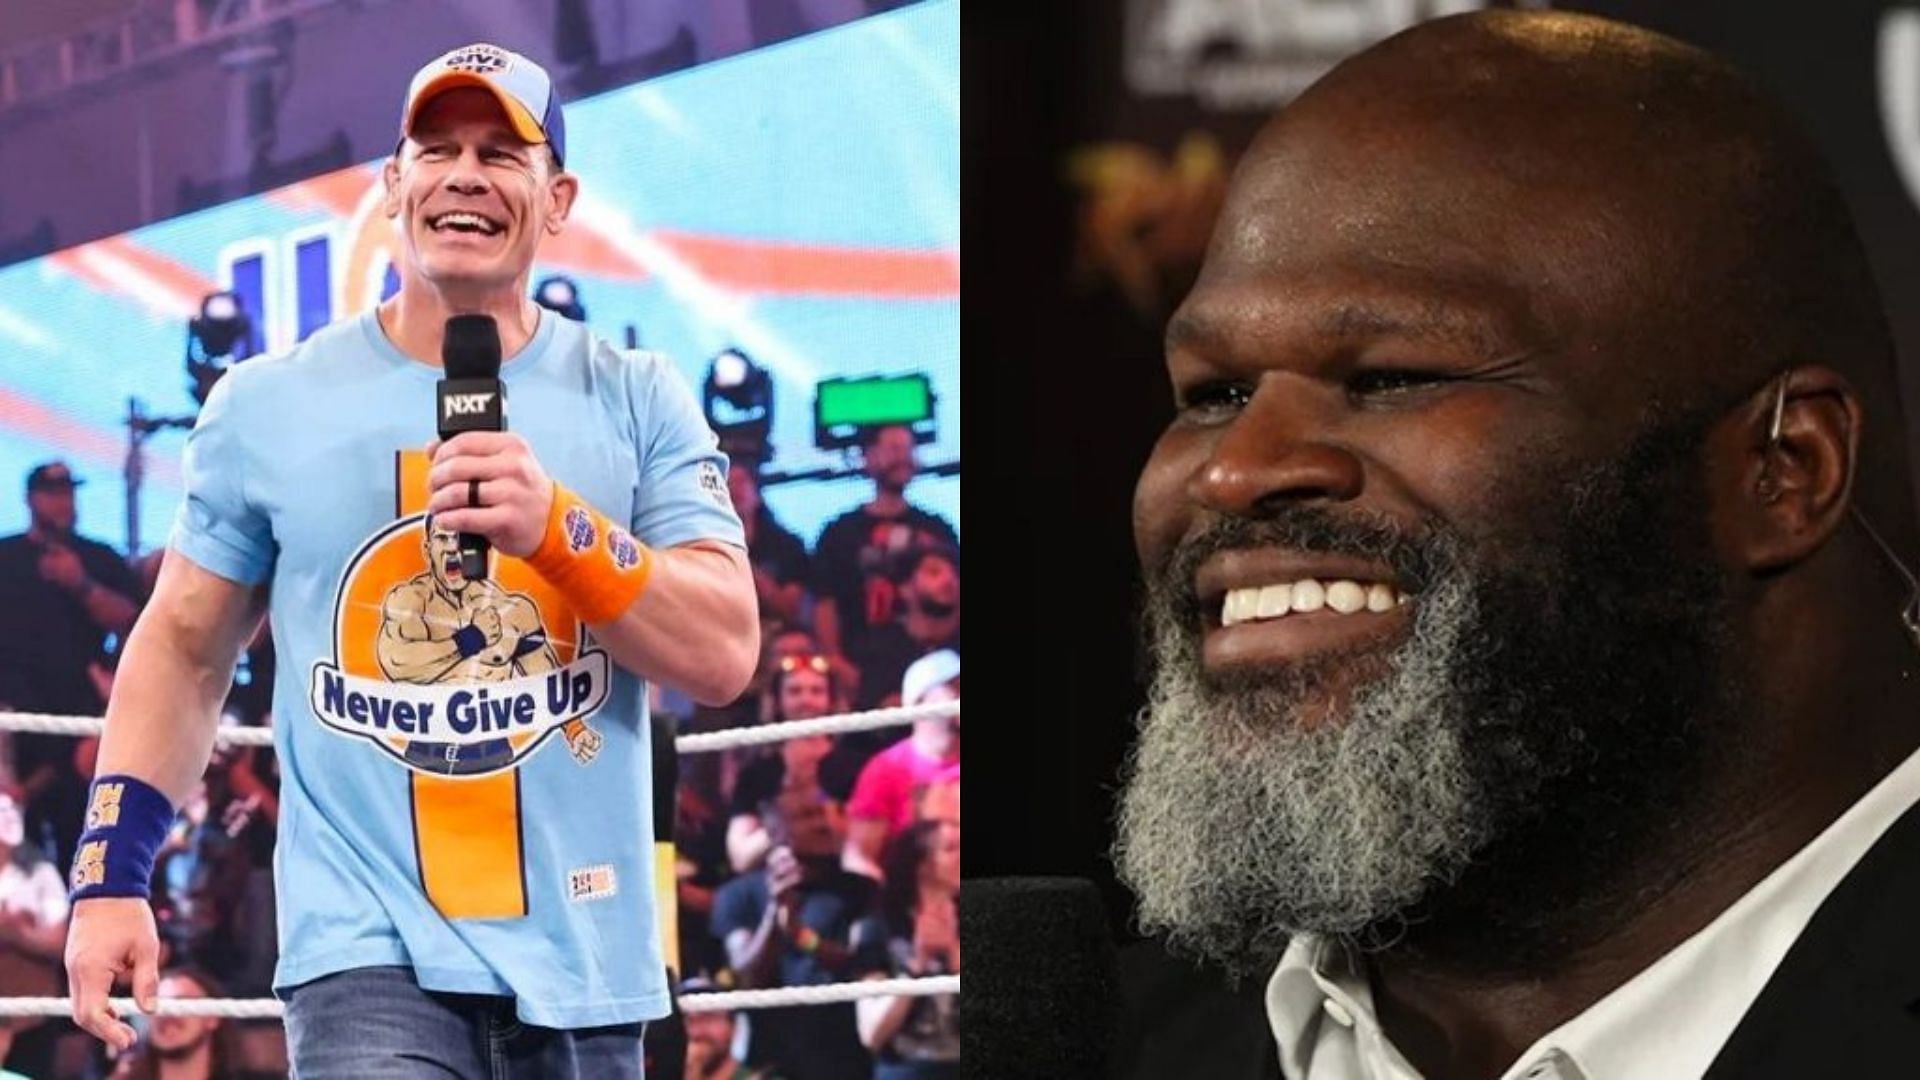 Mark Henry recently had comments about John Cena after recent segment